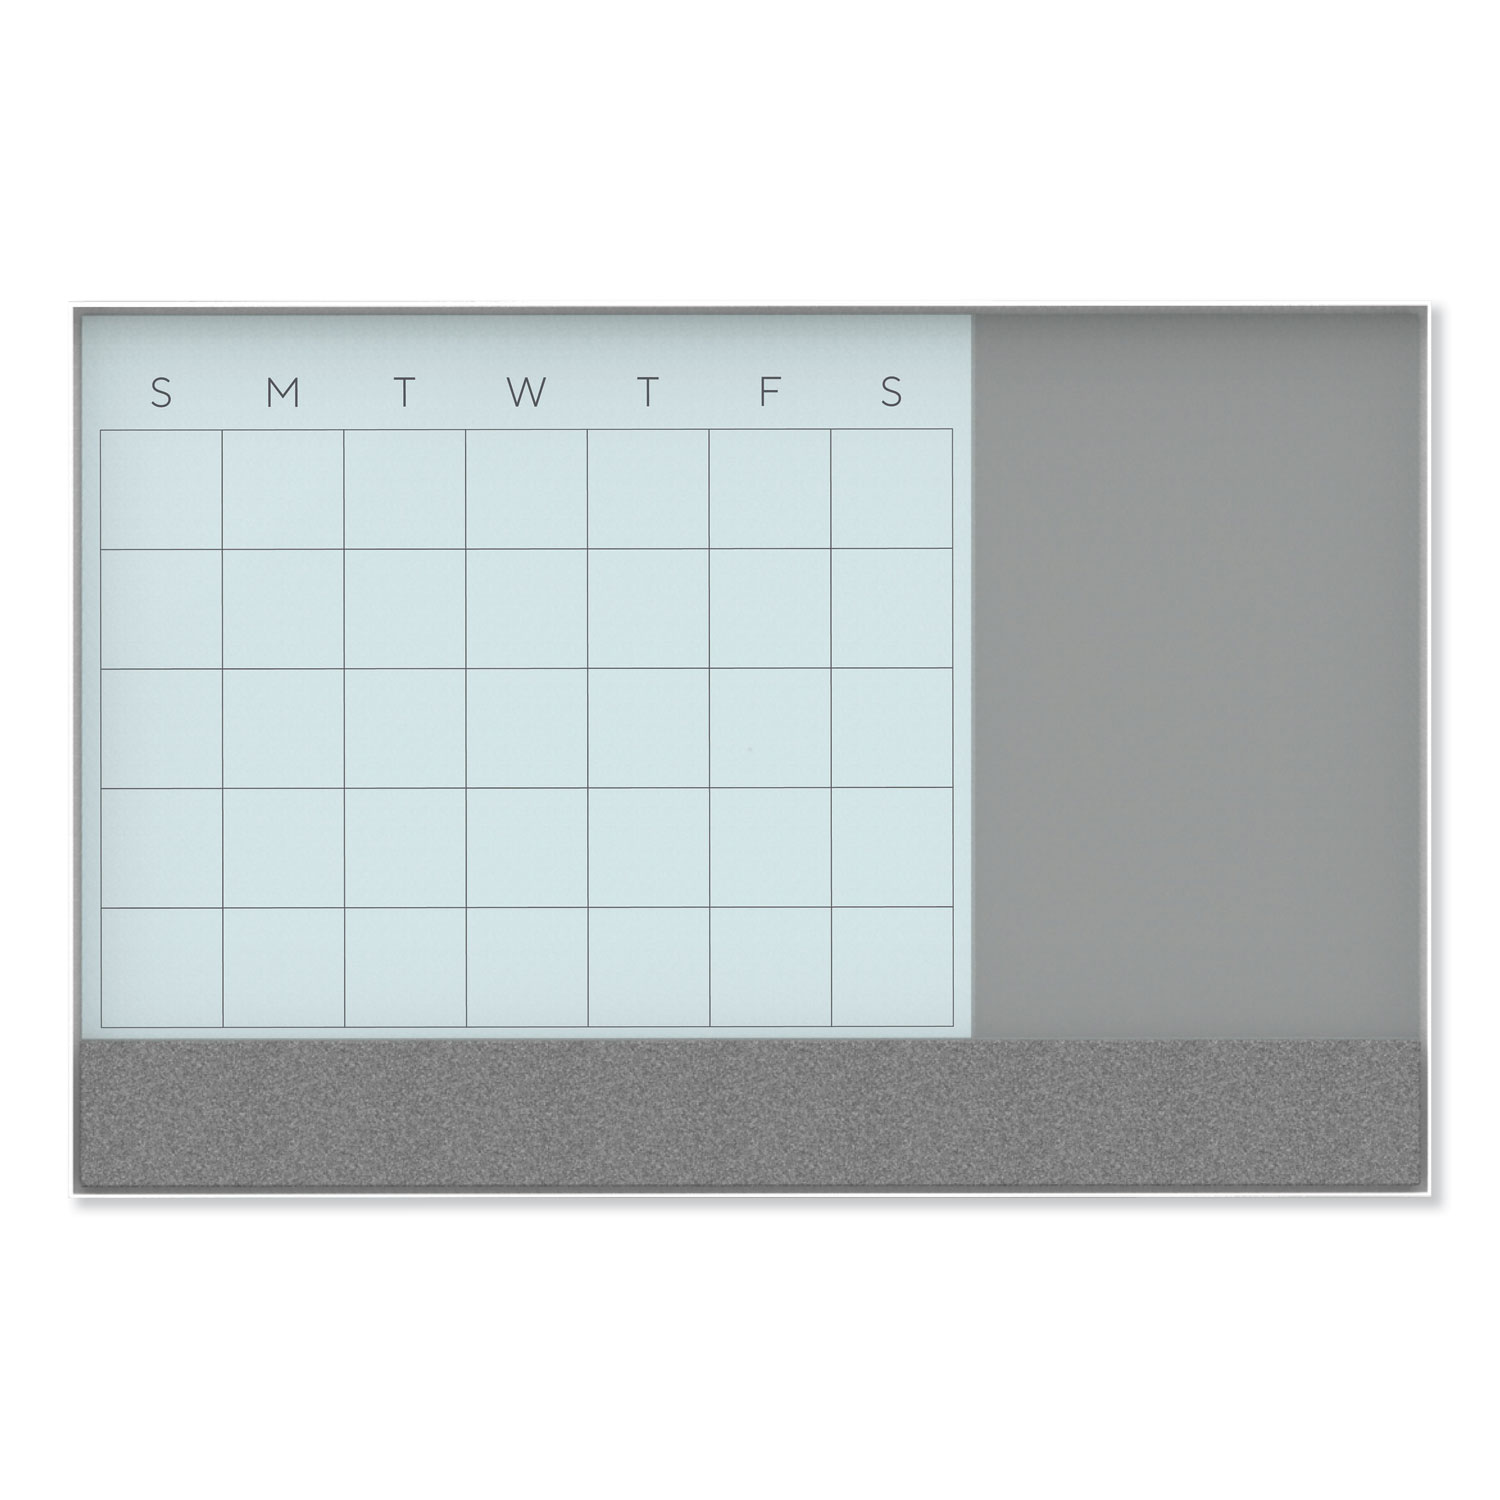  U Brands 3196U00-01 3N1 Magnetic Glass Dry Erase Combo Board, 24 x 18, Month View, White Surface and Frame (UBR3196U0001) 